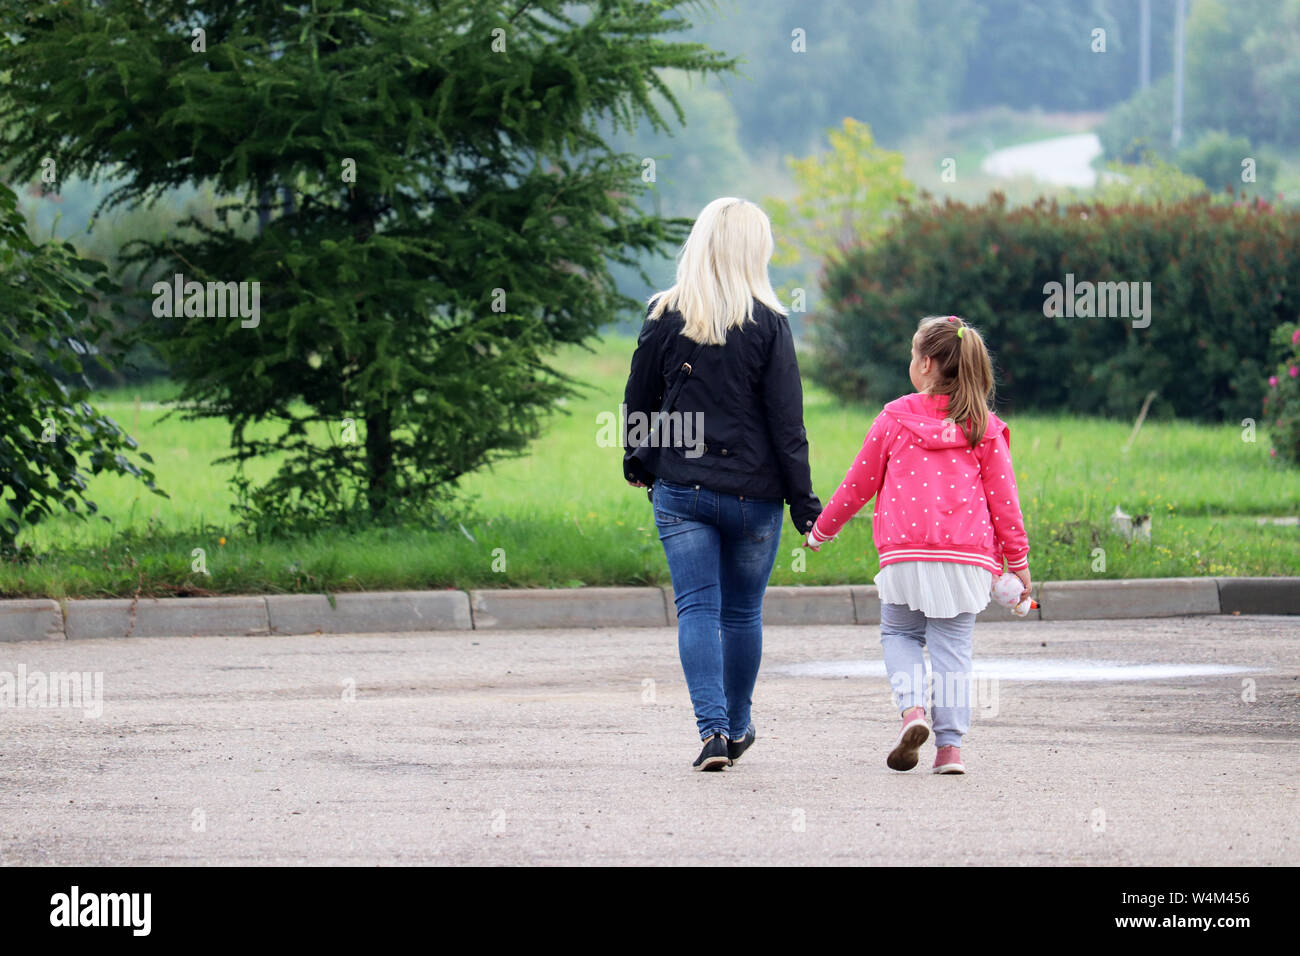 Mother and daughter are walking in a green park holding hands. Blonde woman lead little girl, concept of motherhood, single mom or babysitter Stock Photo